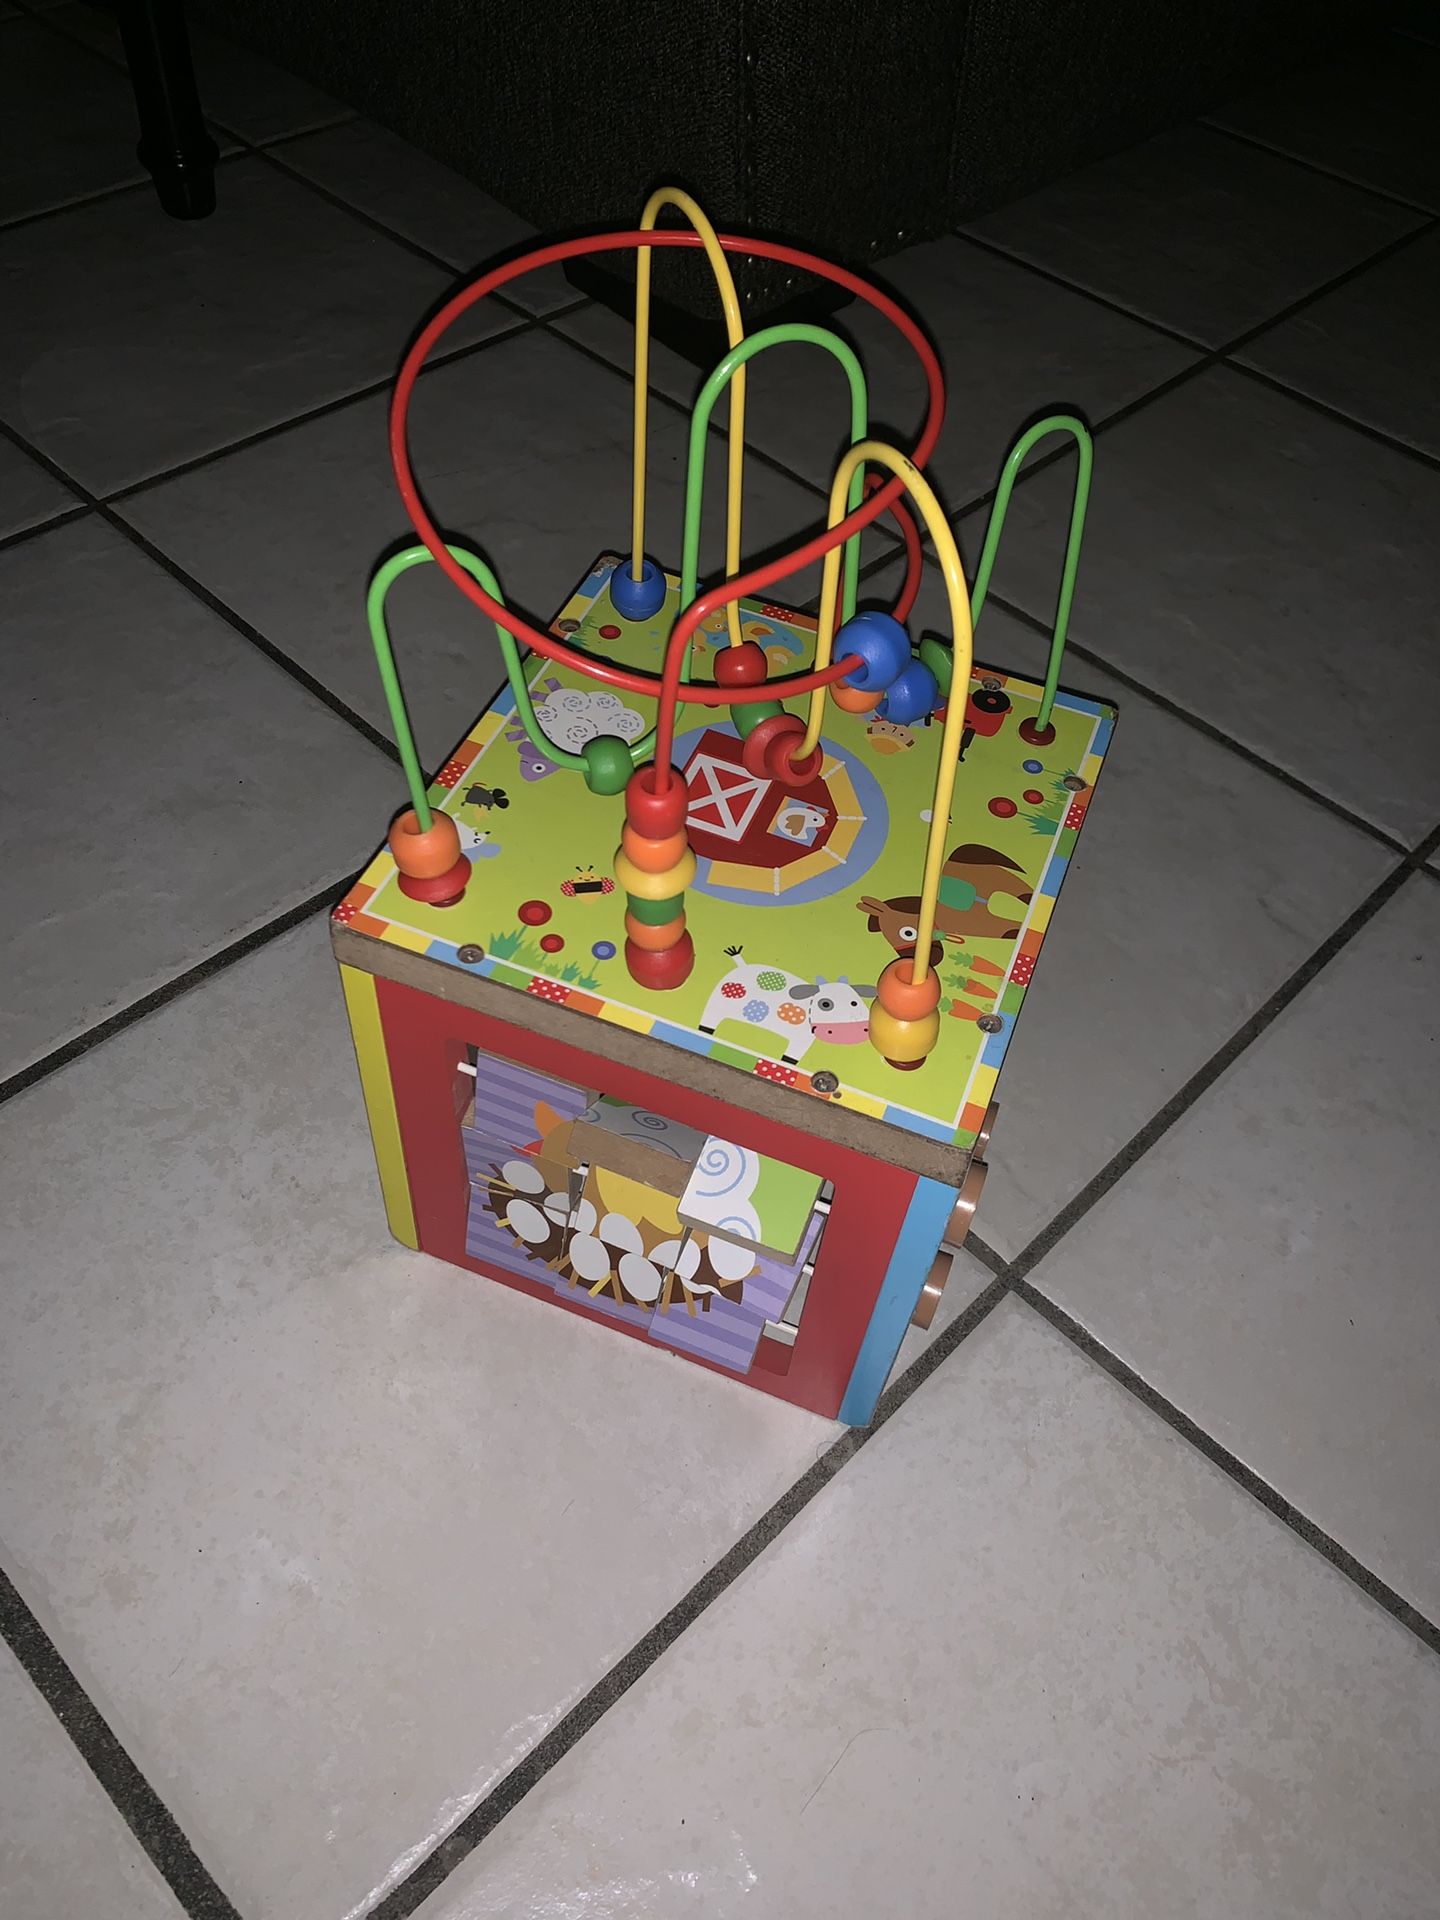 Baby/toddler learning/sensory toy